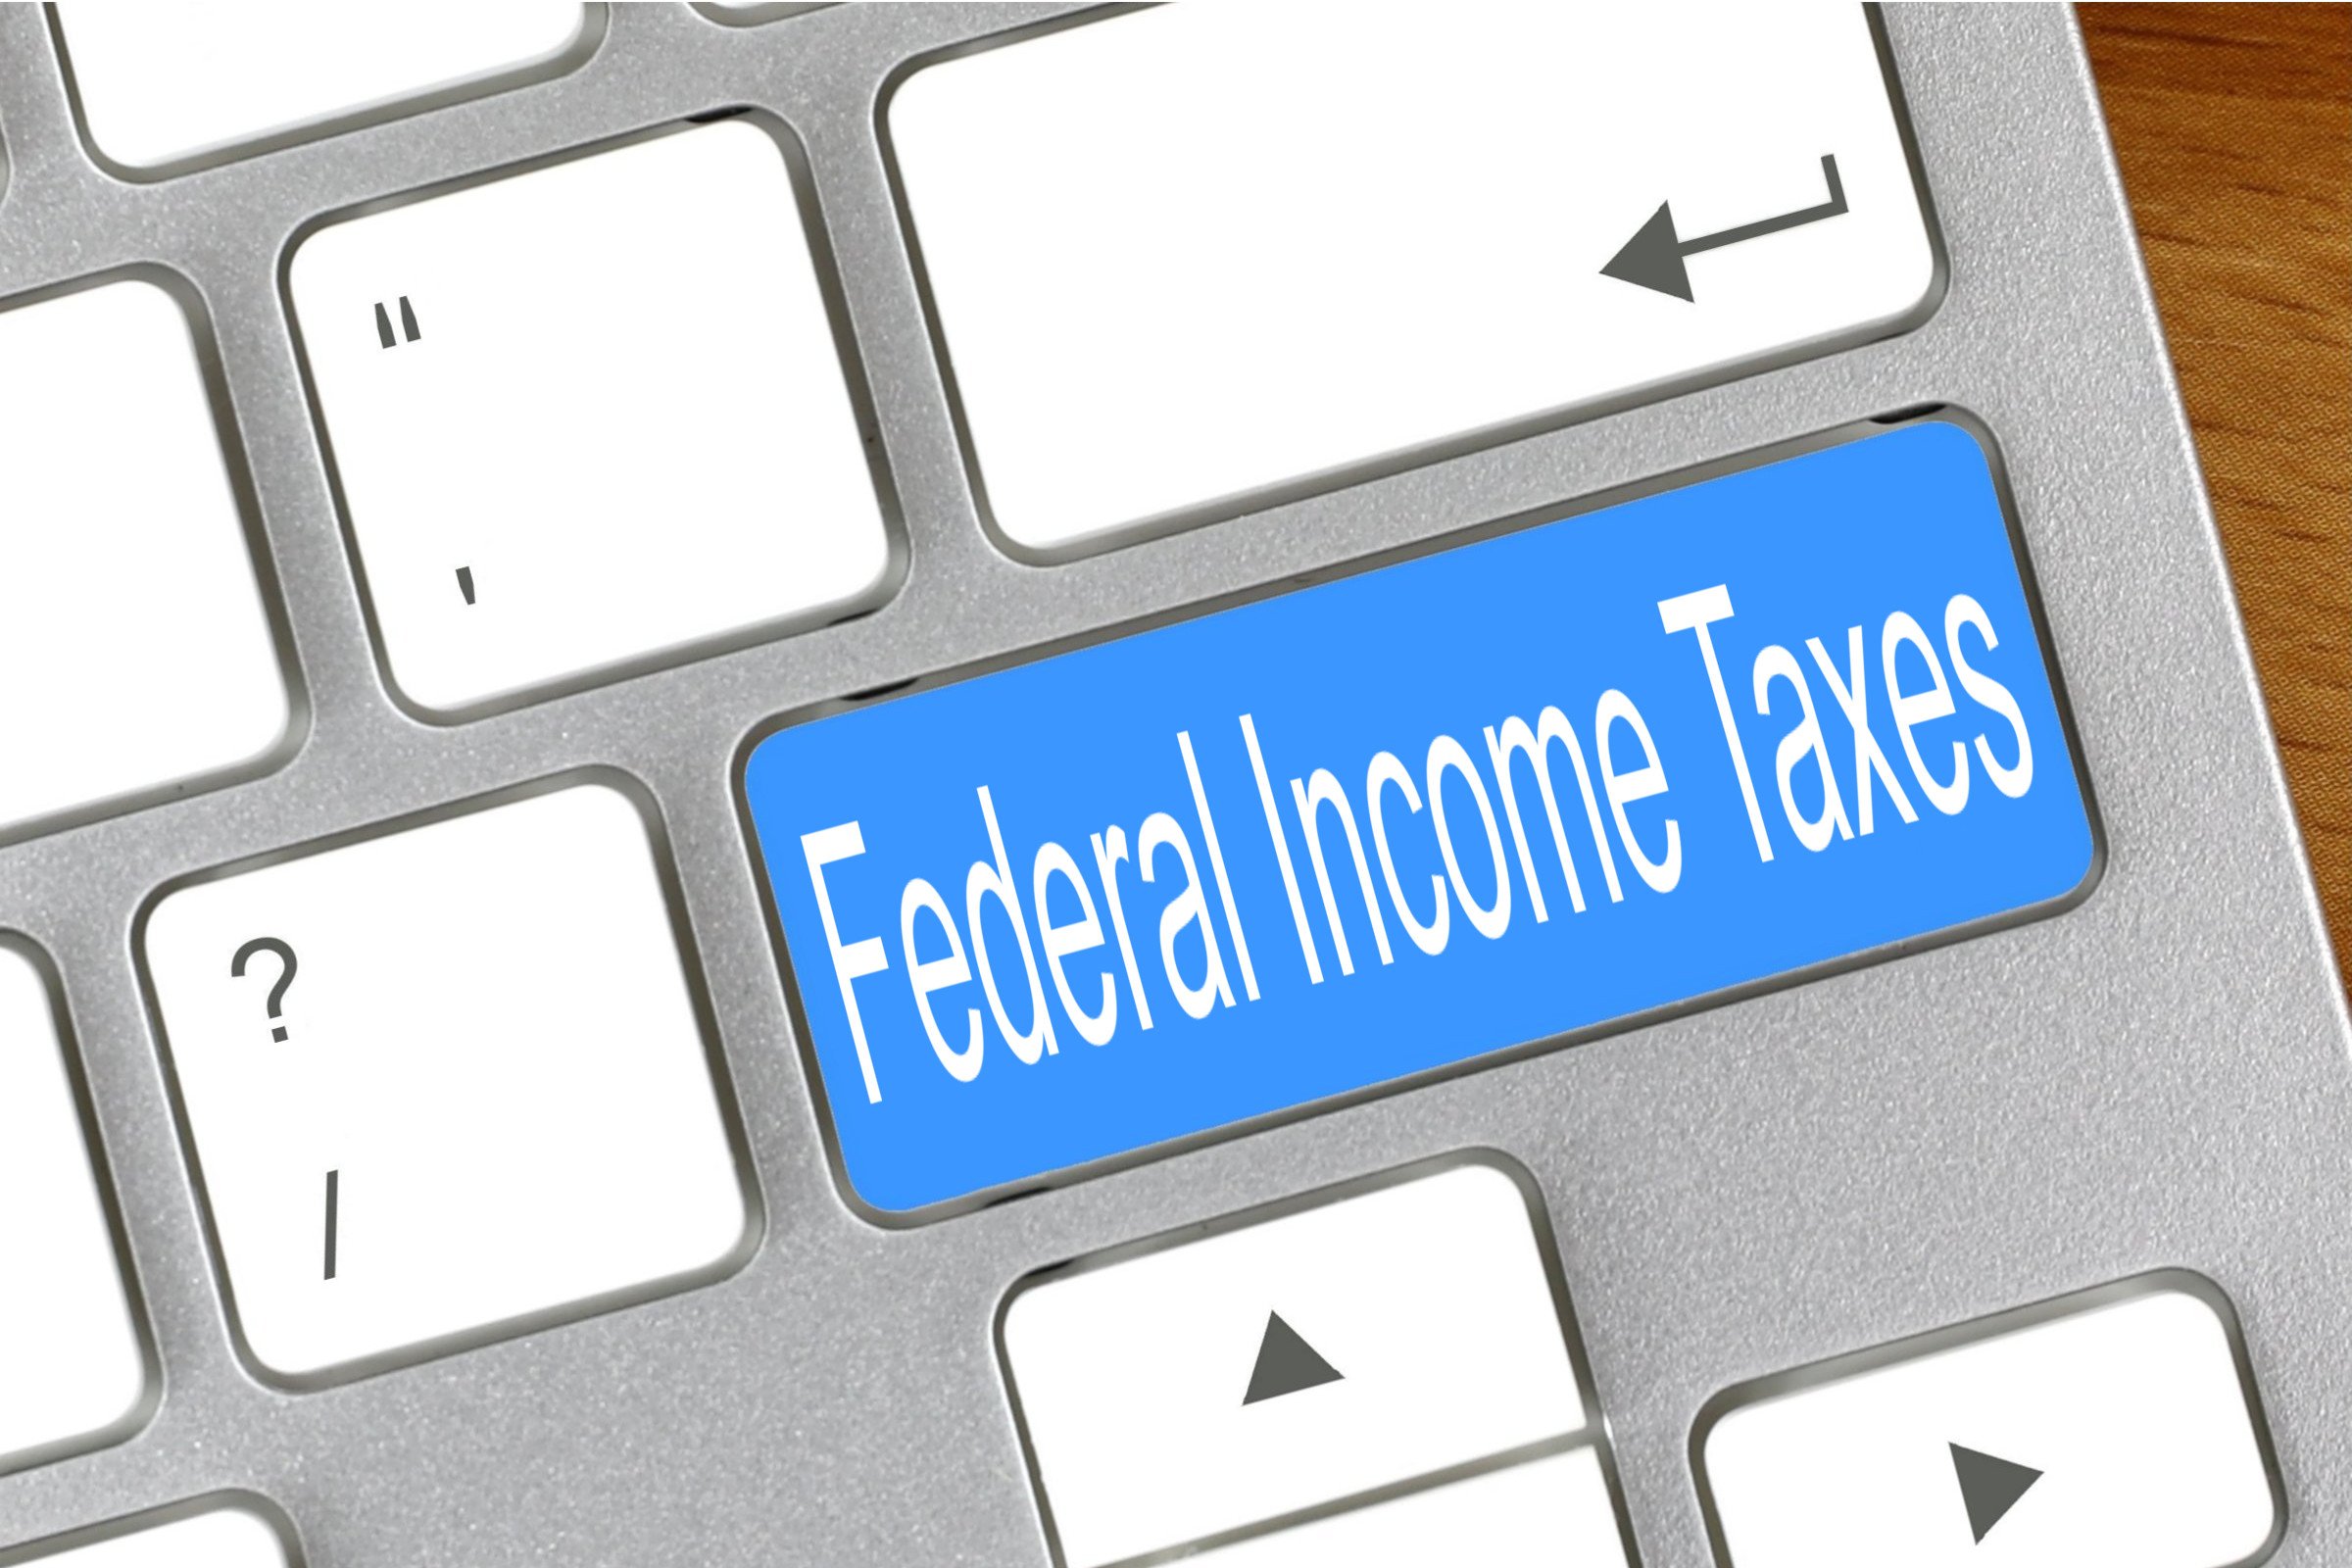 federal income taxes